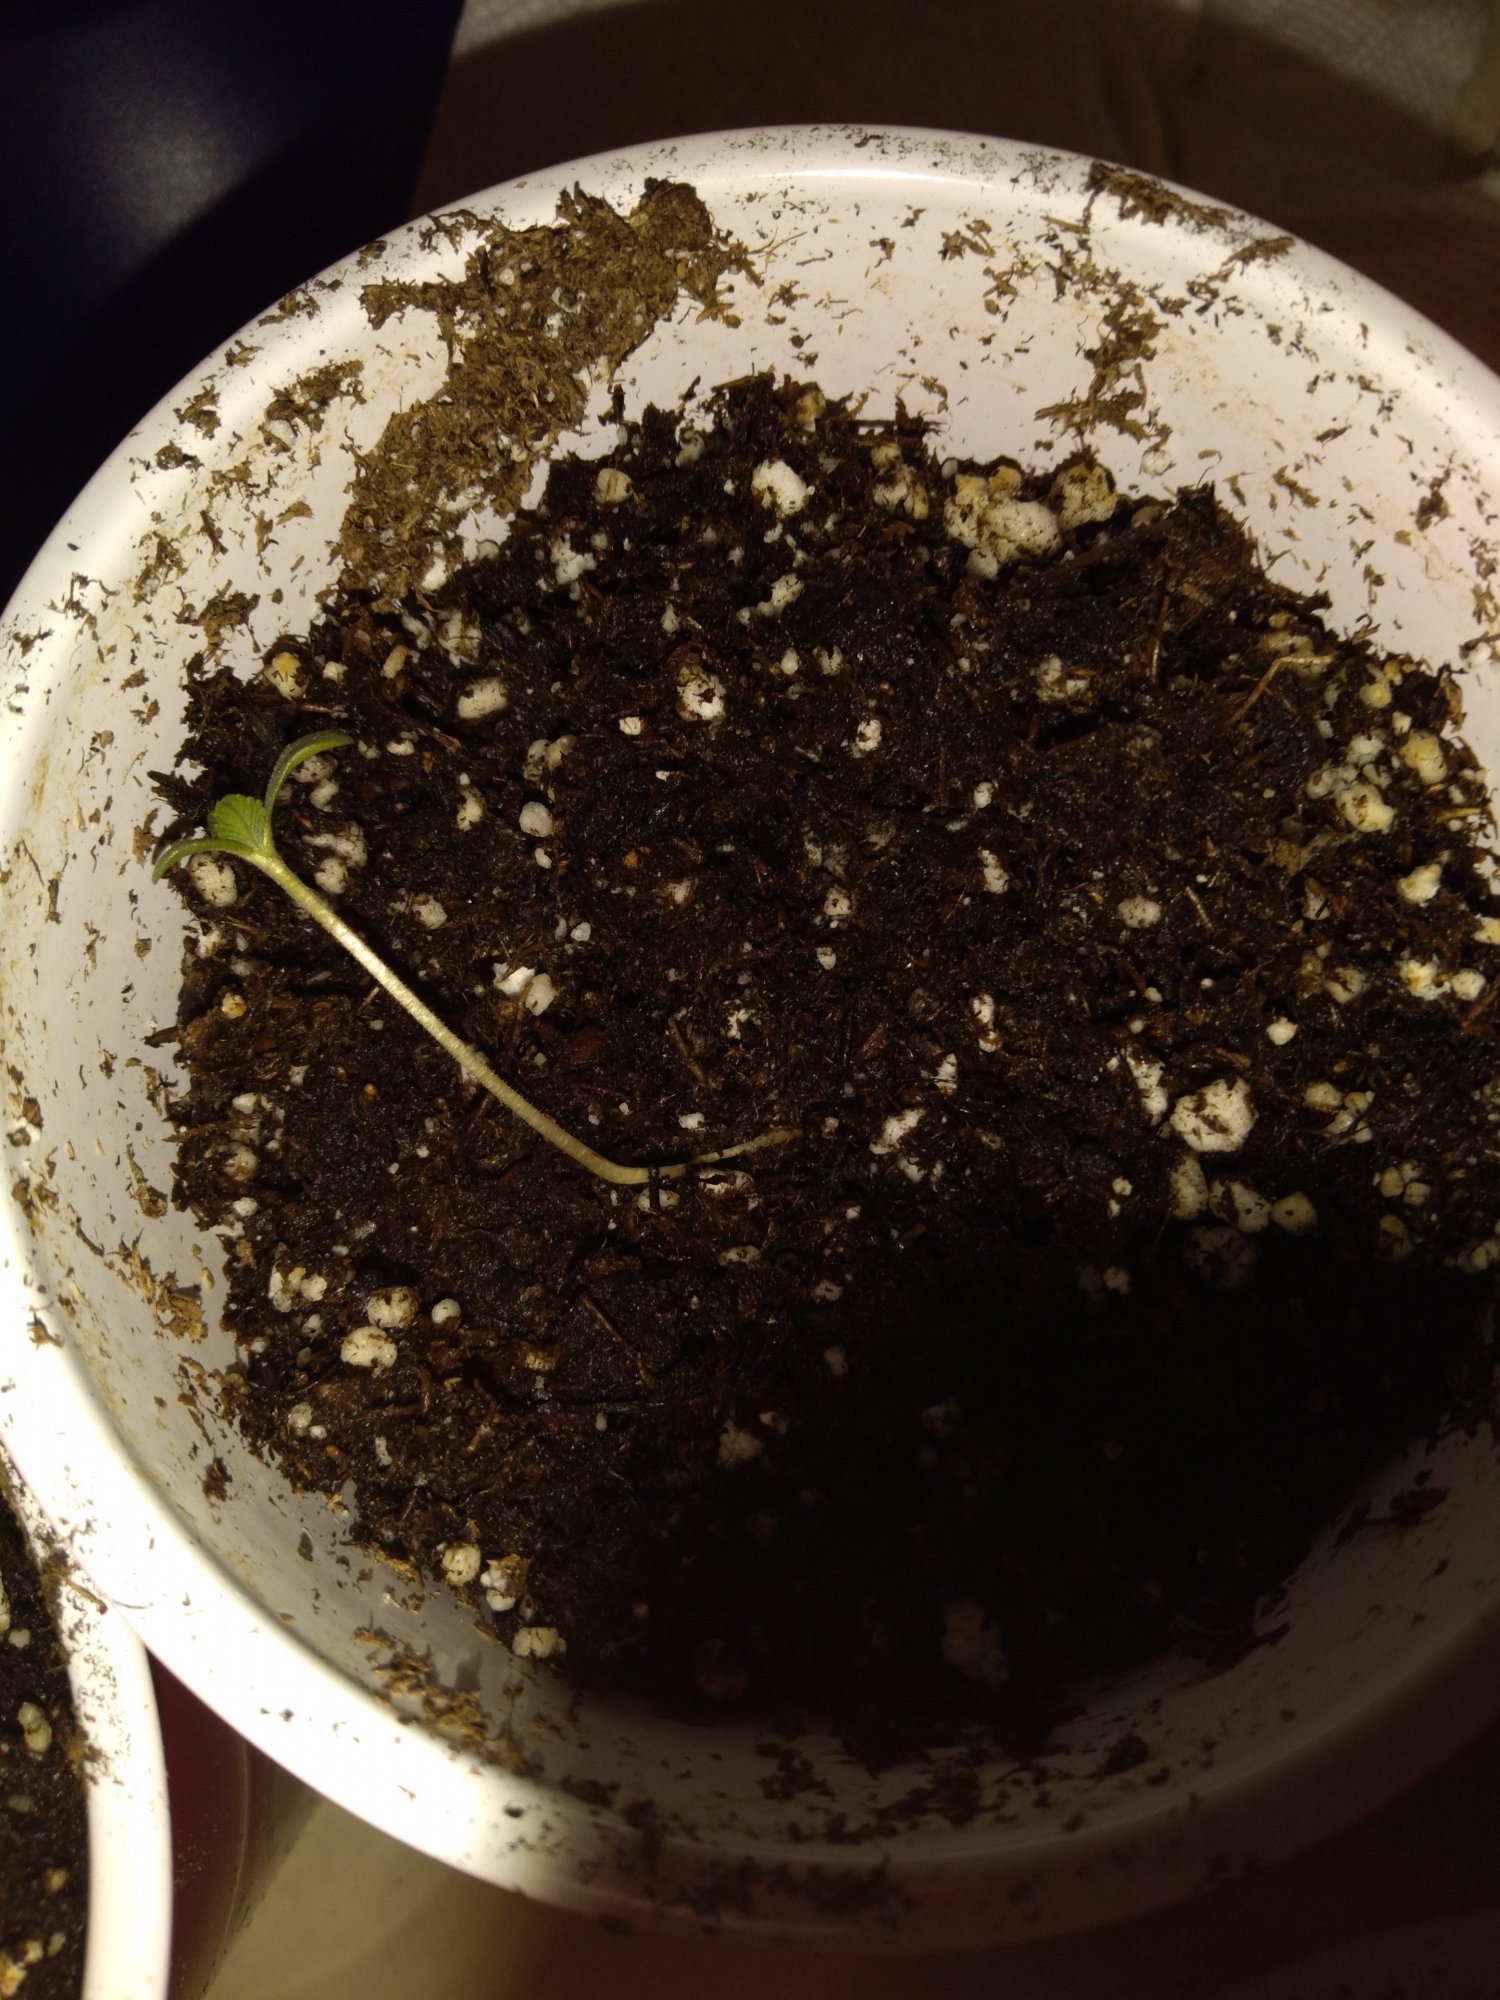 Seedlings keep wilting over and  dying 3